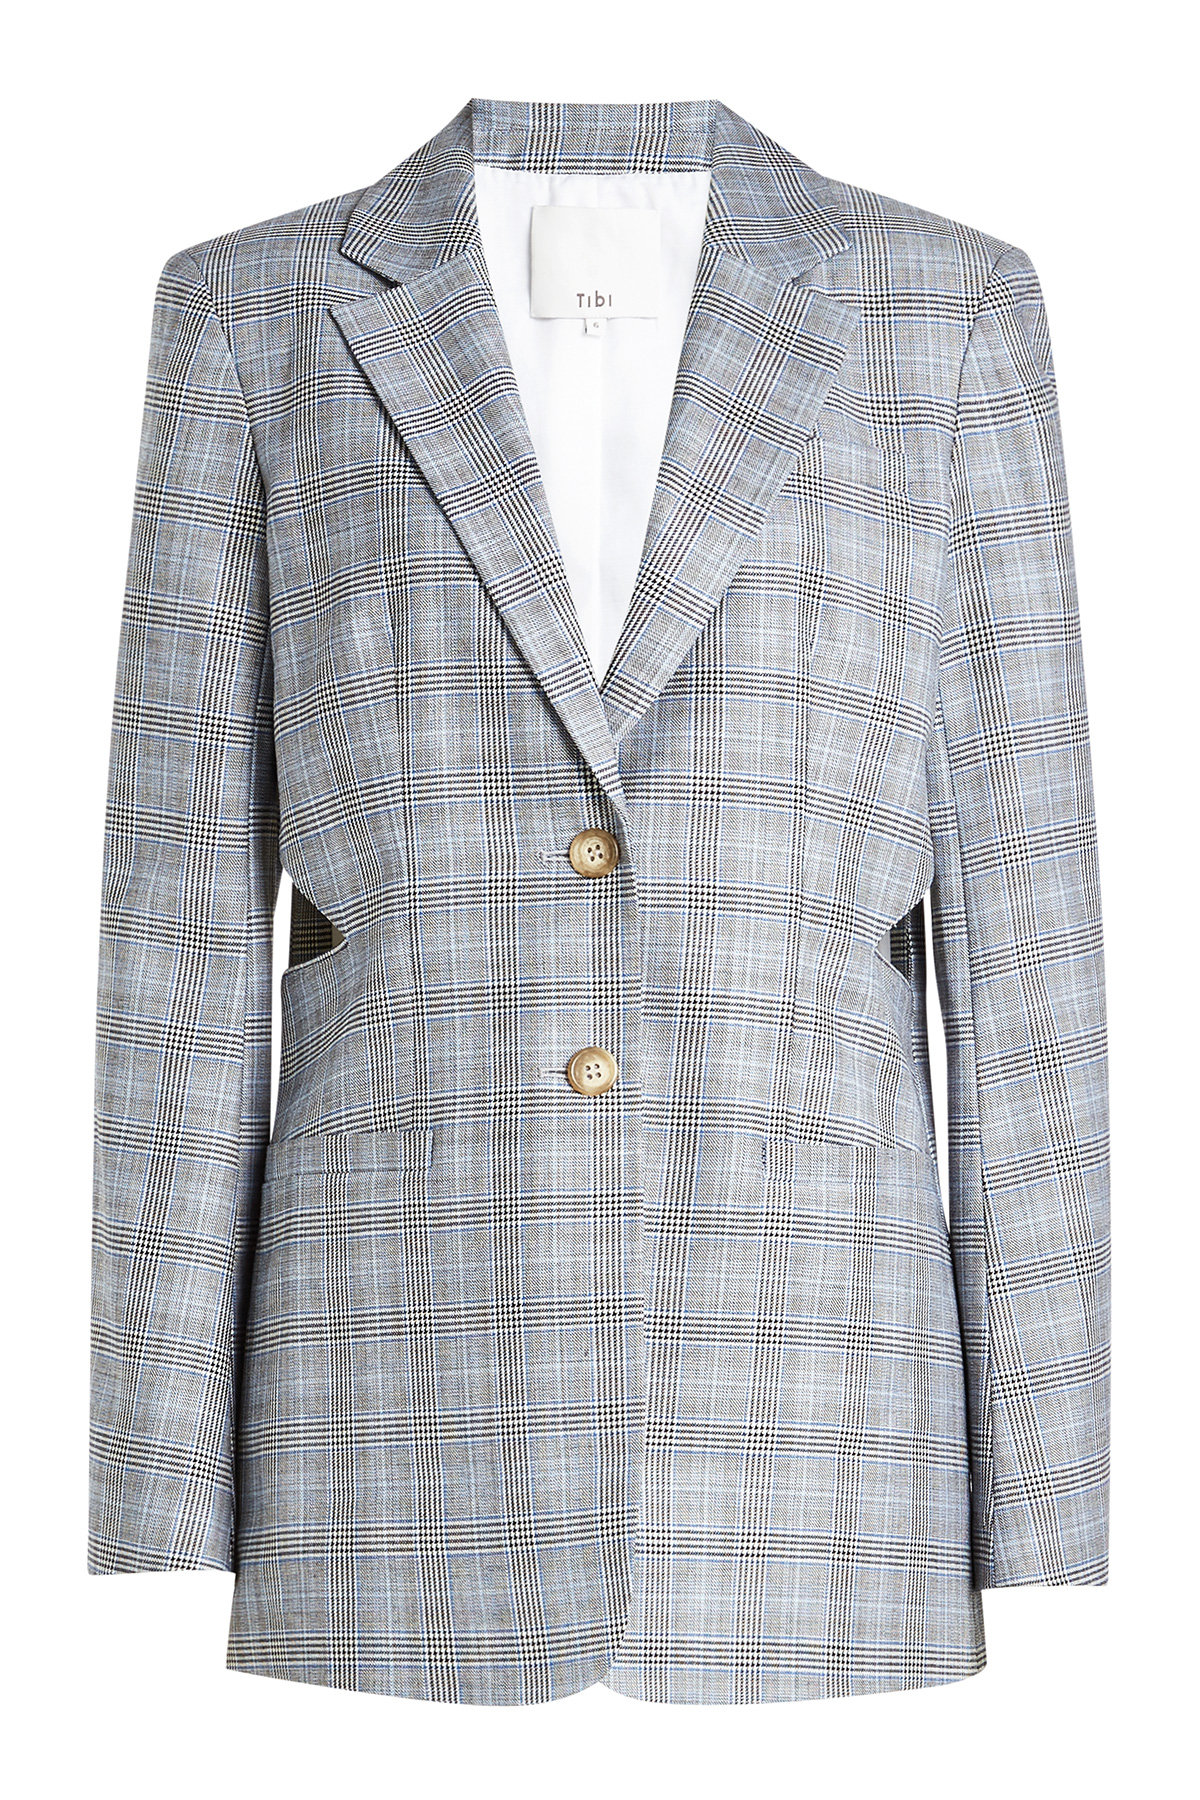 Tibi - Cooper Wool Blazer with Cut-Out Detail